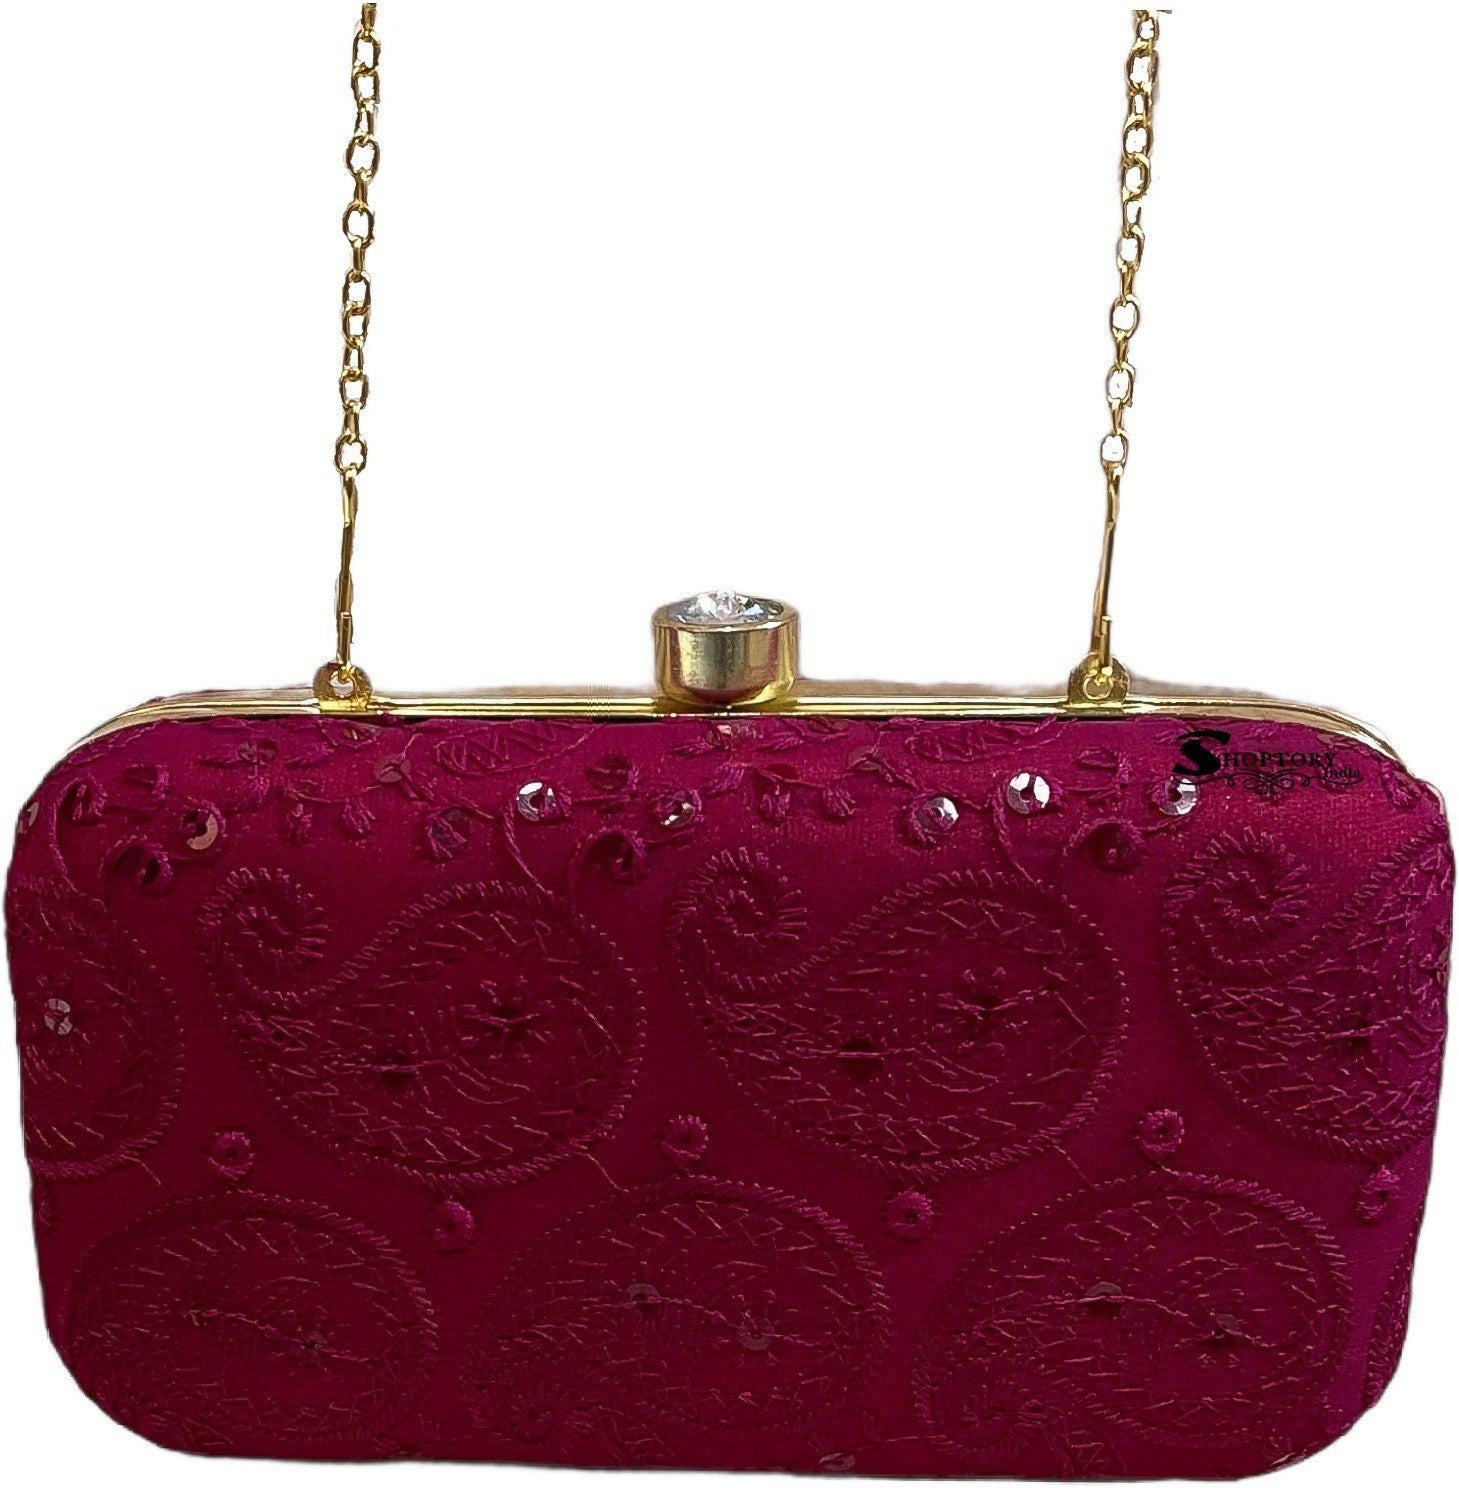 Women's Chickenkari Embroidered Crossbody Belt Sling Bag With Clutch  Wine - Ritzie